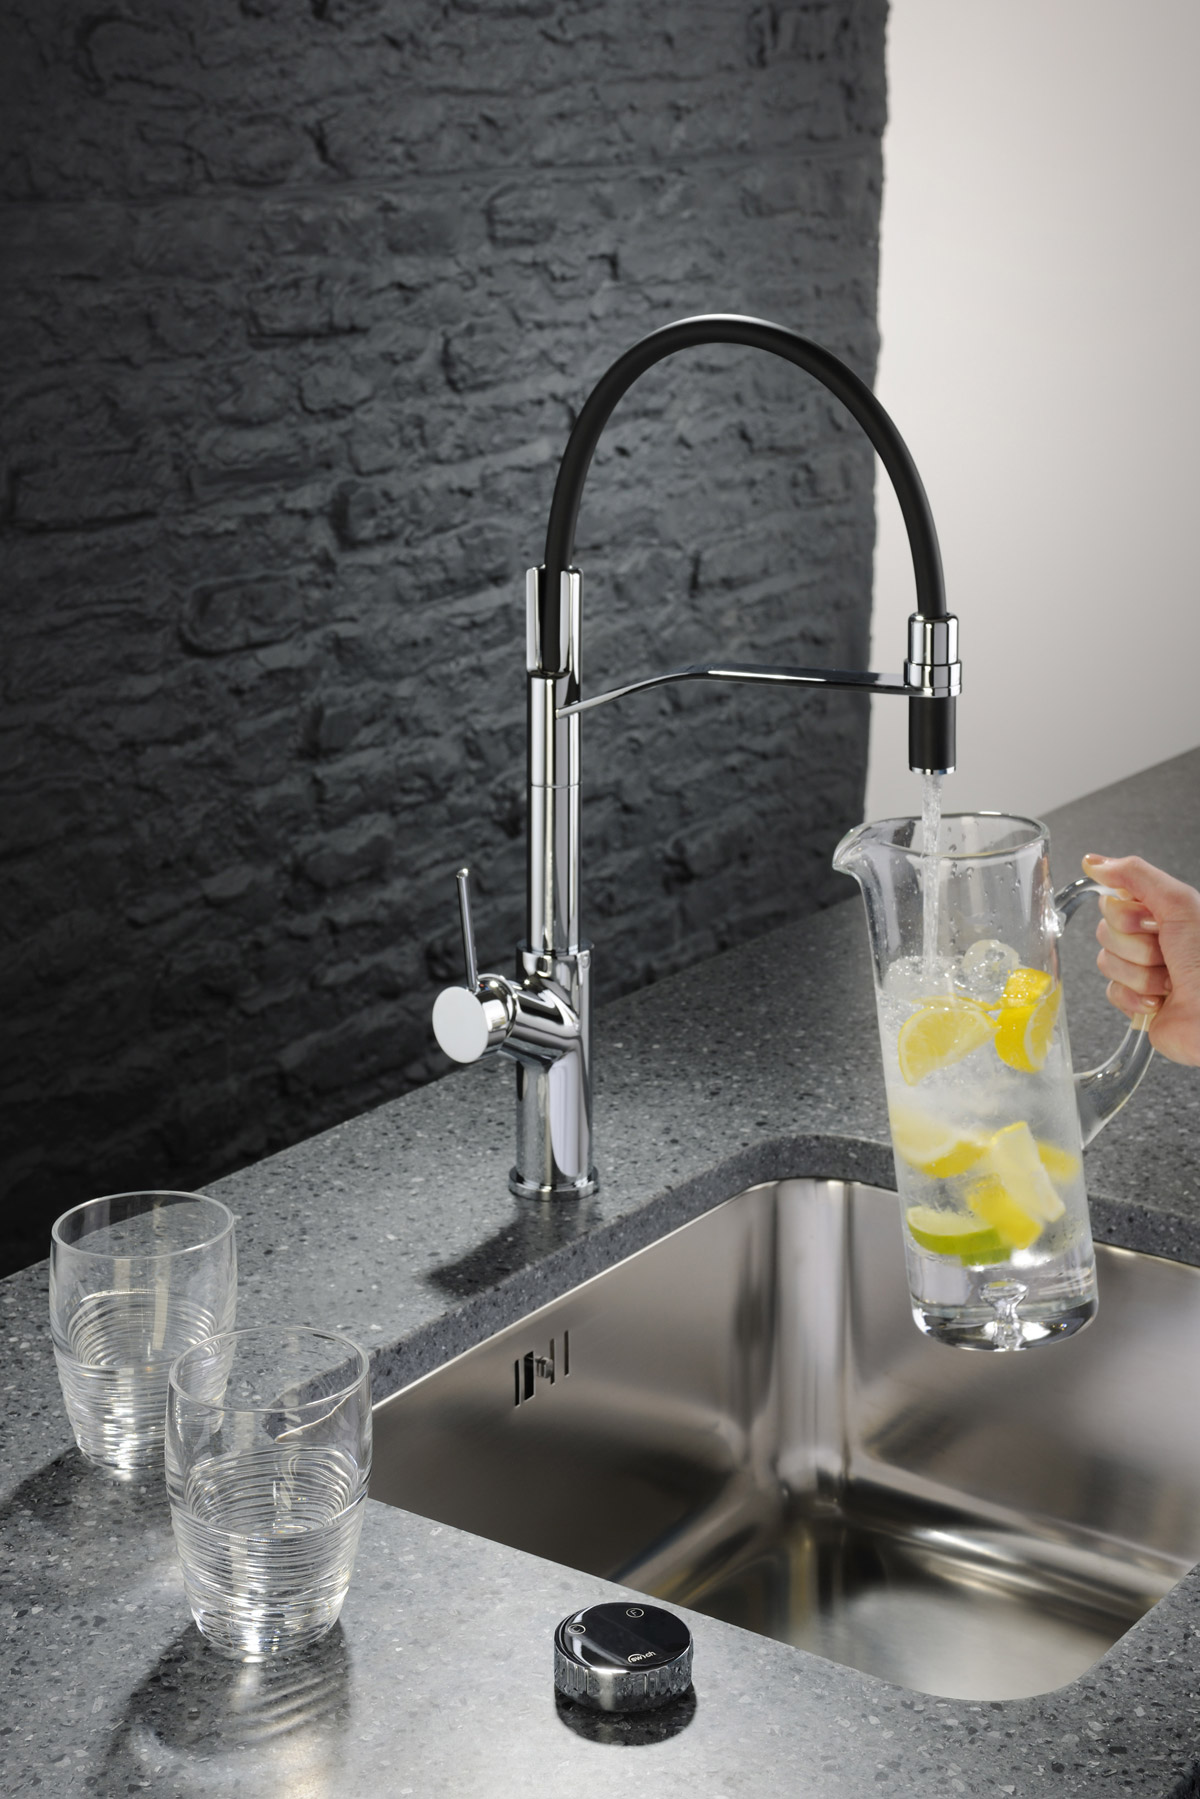 filter water taps, Technical Innovation and Modern Design In One Filter Switch